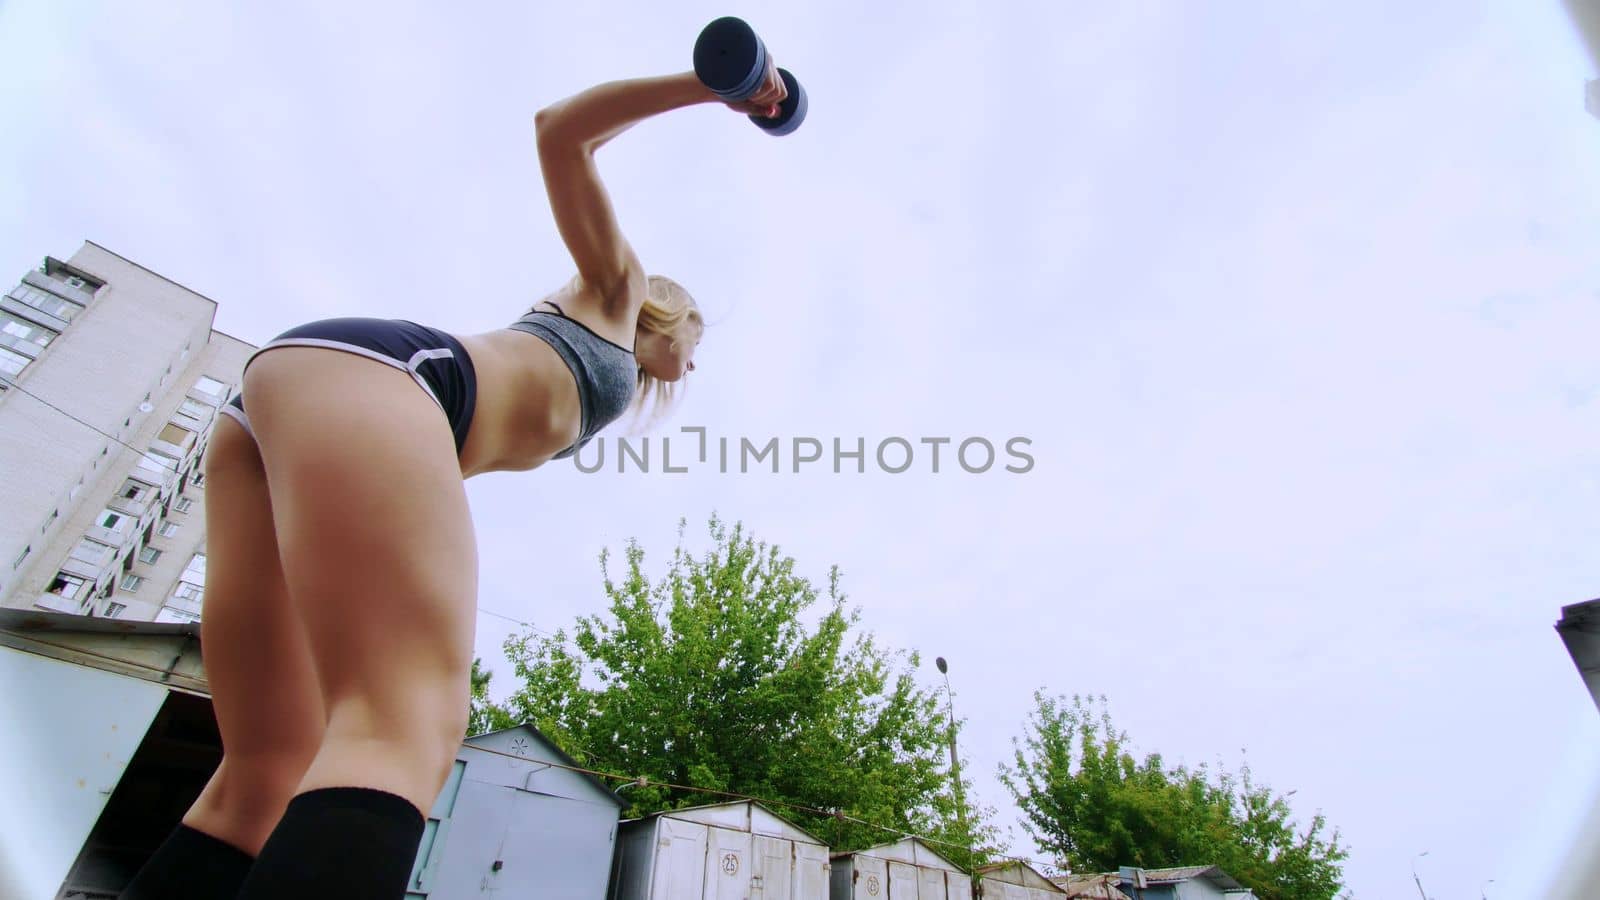 Beautiful sexy athletic young blond woman in top, shorts, engaged in crossfit, performs various strength exercises with dumbbells, close-up, near the old abandoned garages. High quality photo